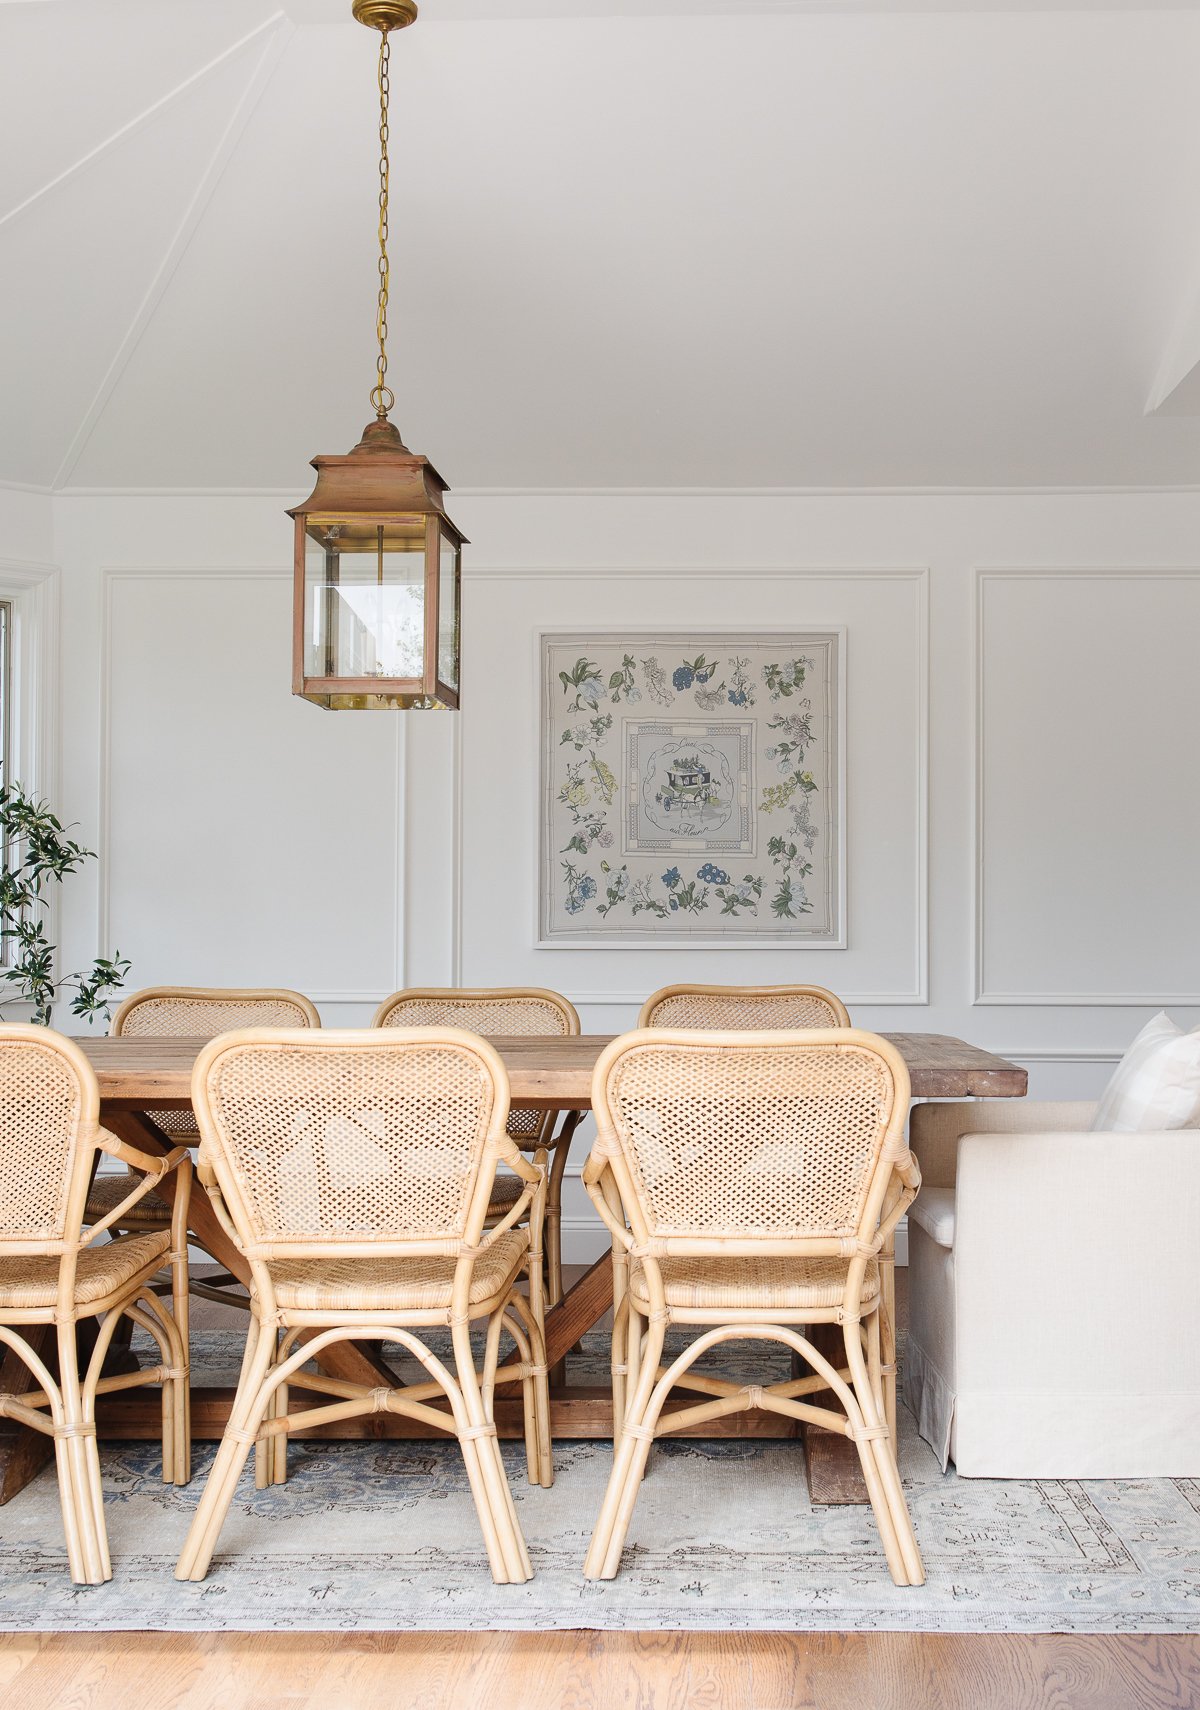 A white dining room with rattan dining chairs and a framed silk scarf in a guide to luxury home decor.